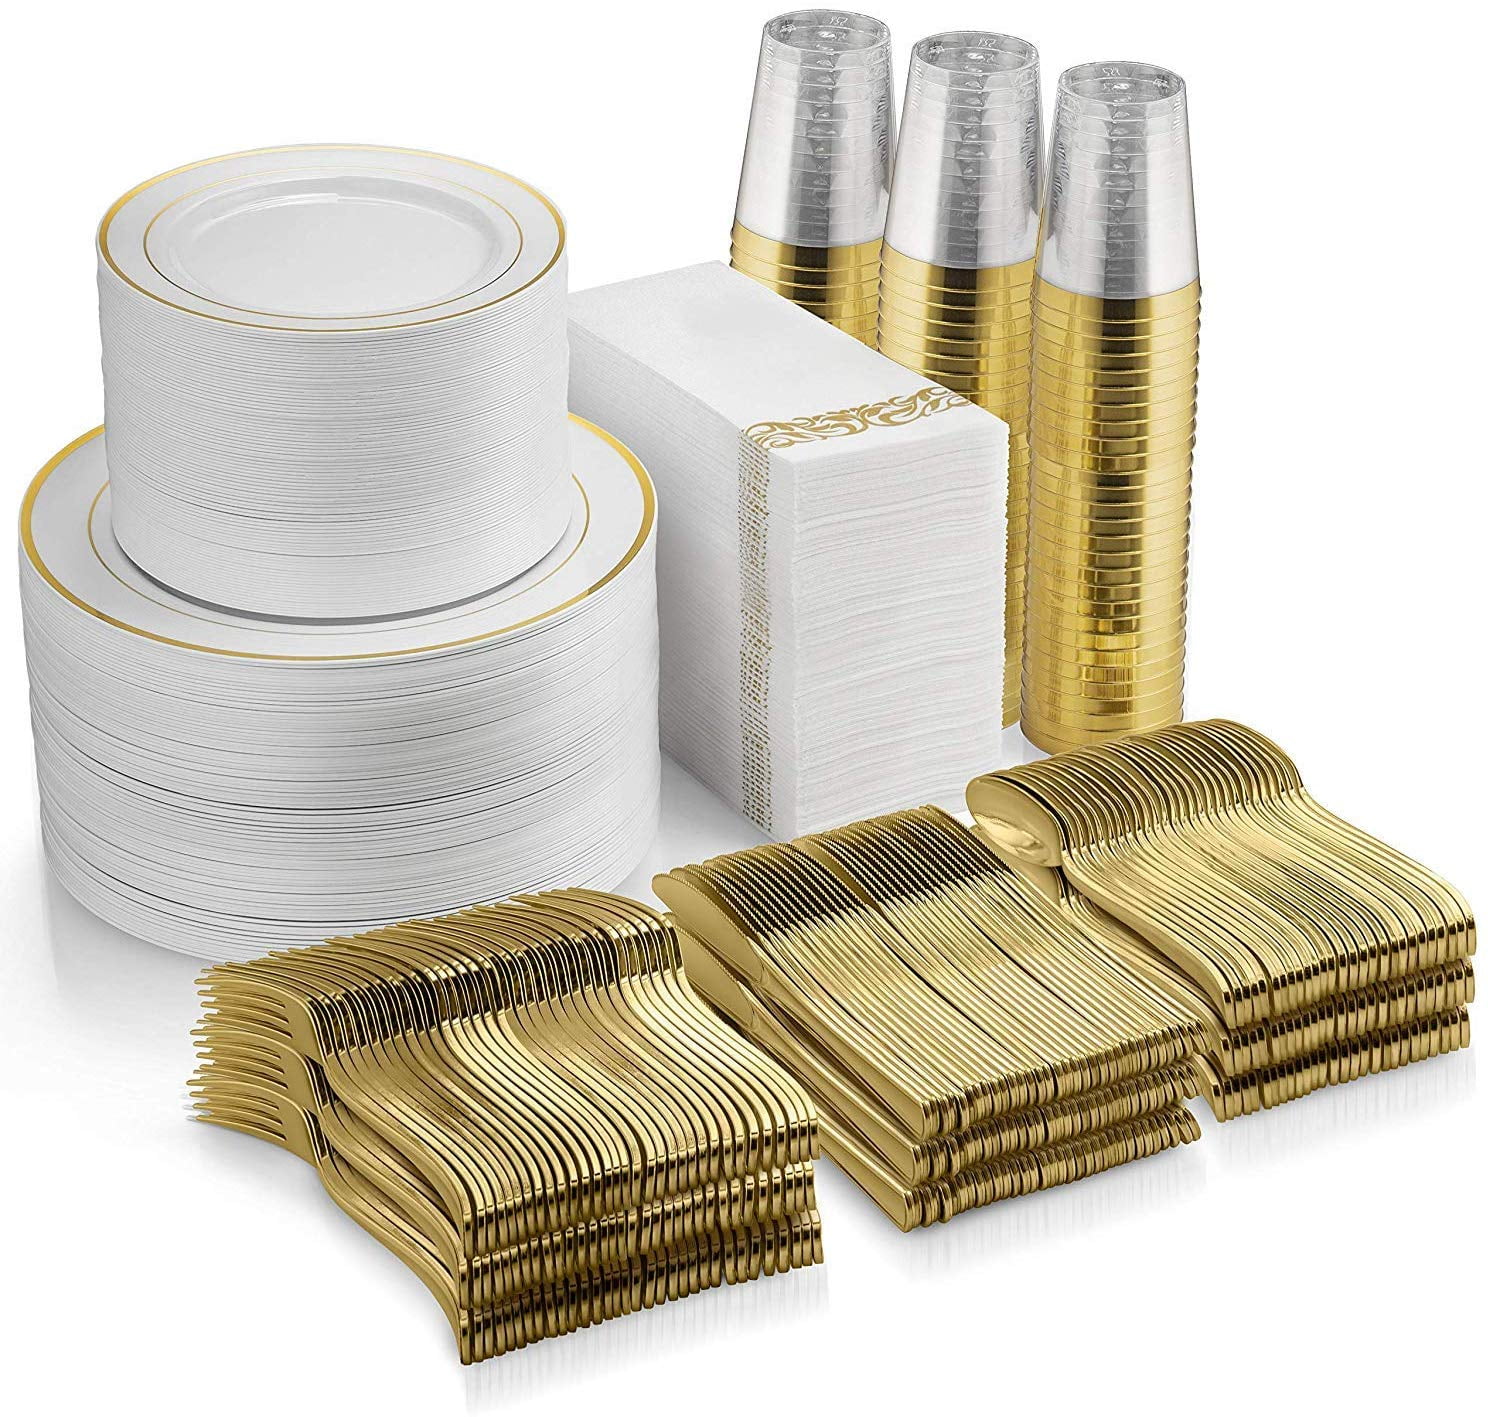 Disposable Gold Silverware and Cups WELLIFE 96 Pcs Gold Plastic Plates 16 Salad Plates 7.5 16 Cutlery and Cups Gold Dinnerware Set Ideal Includes: 16 Dinner Plates 10.25